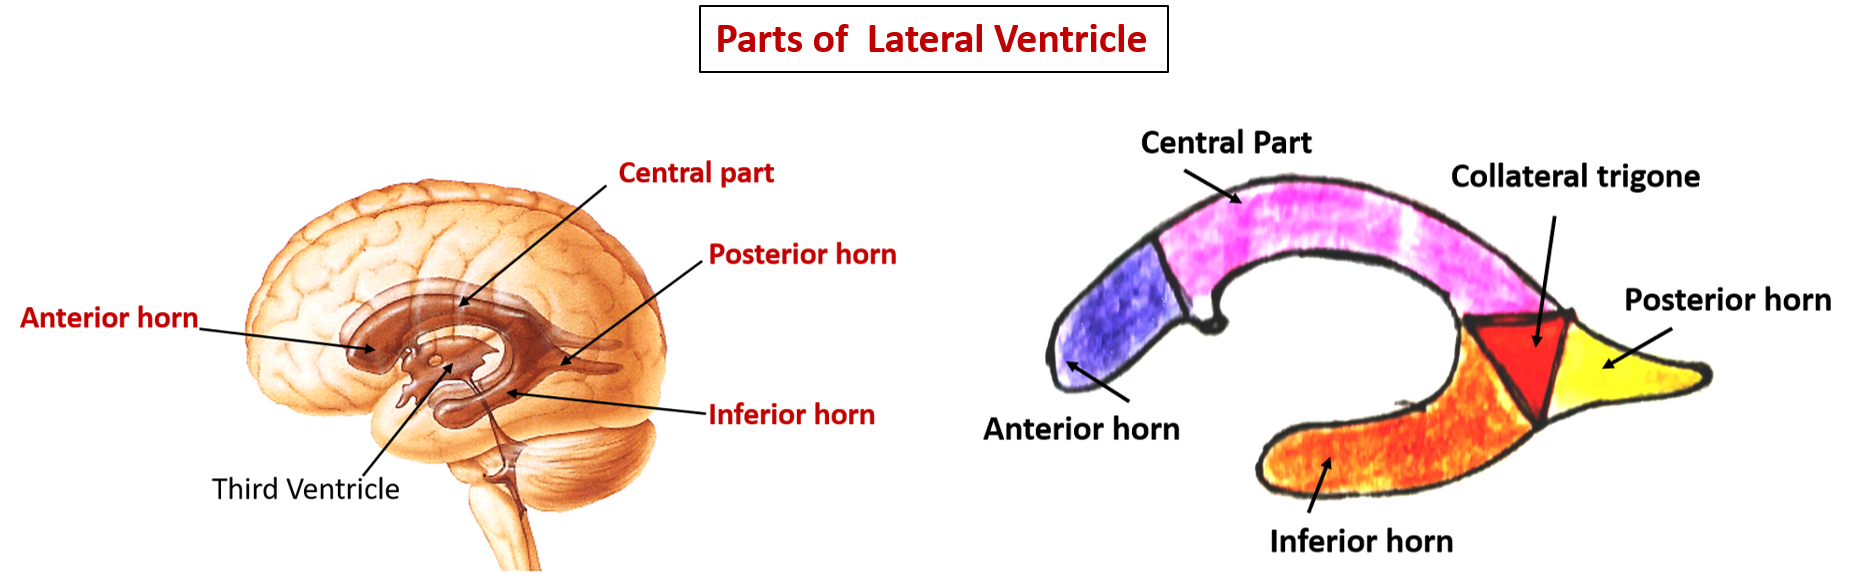 parts of lateral ventricle